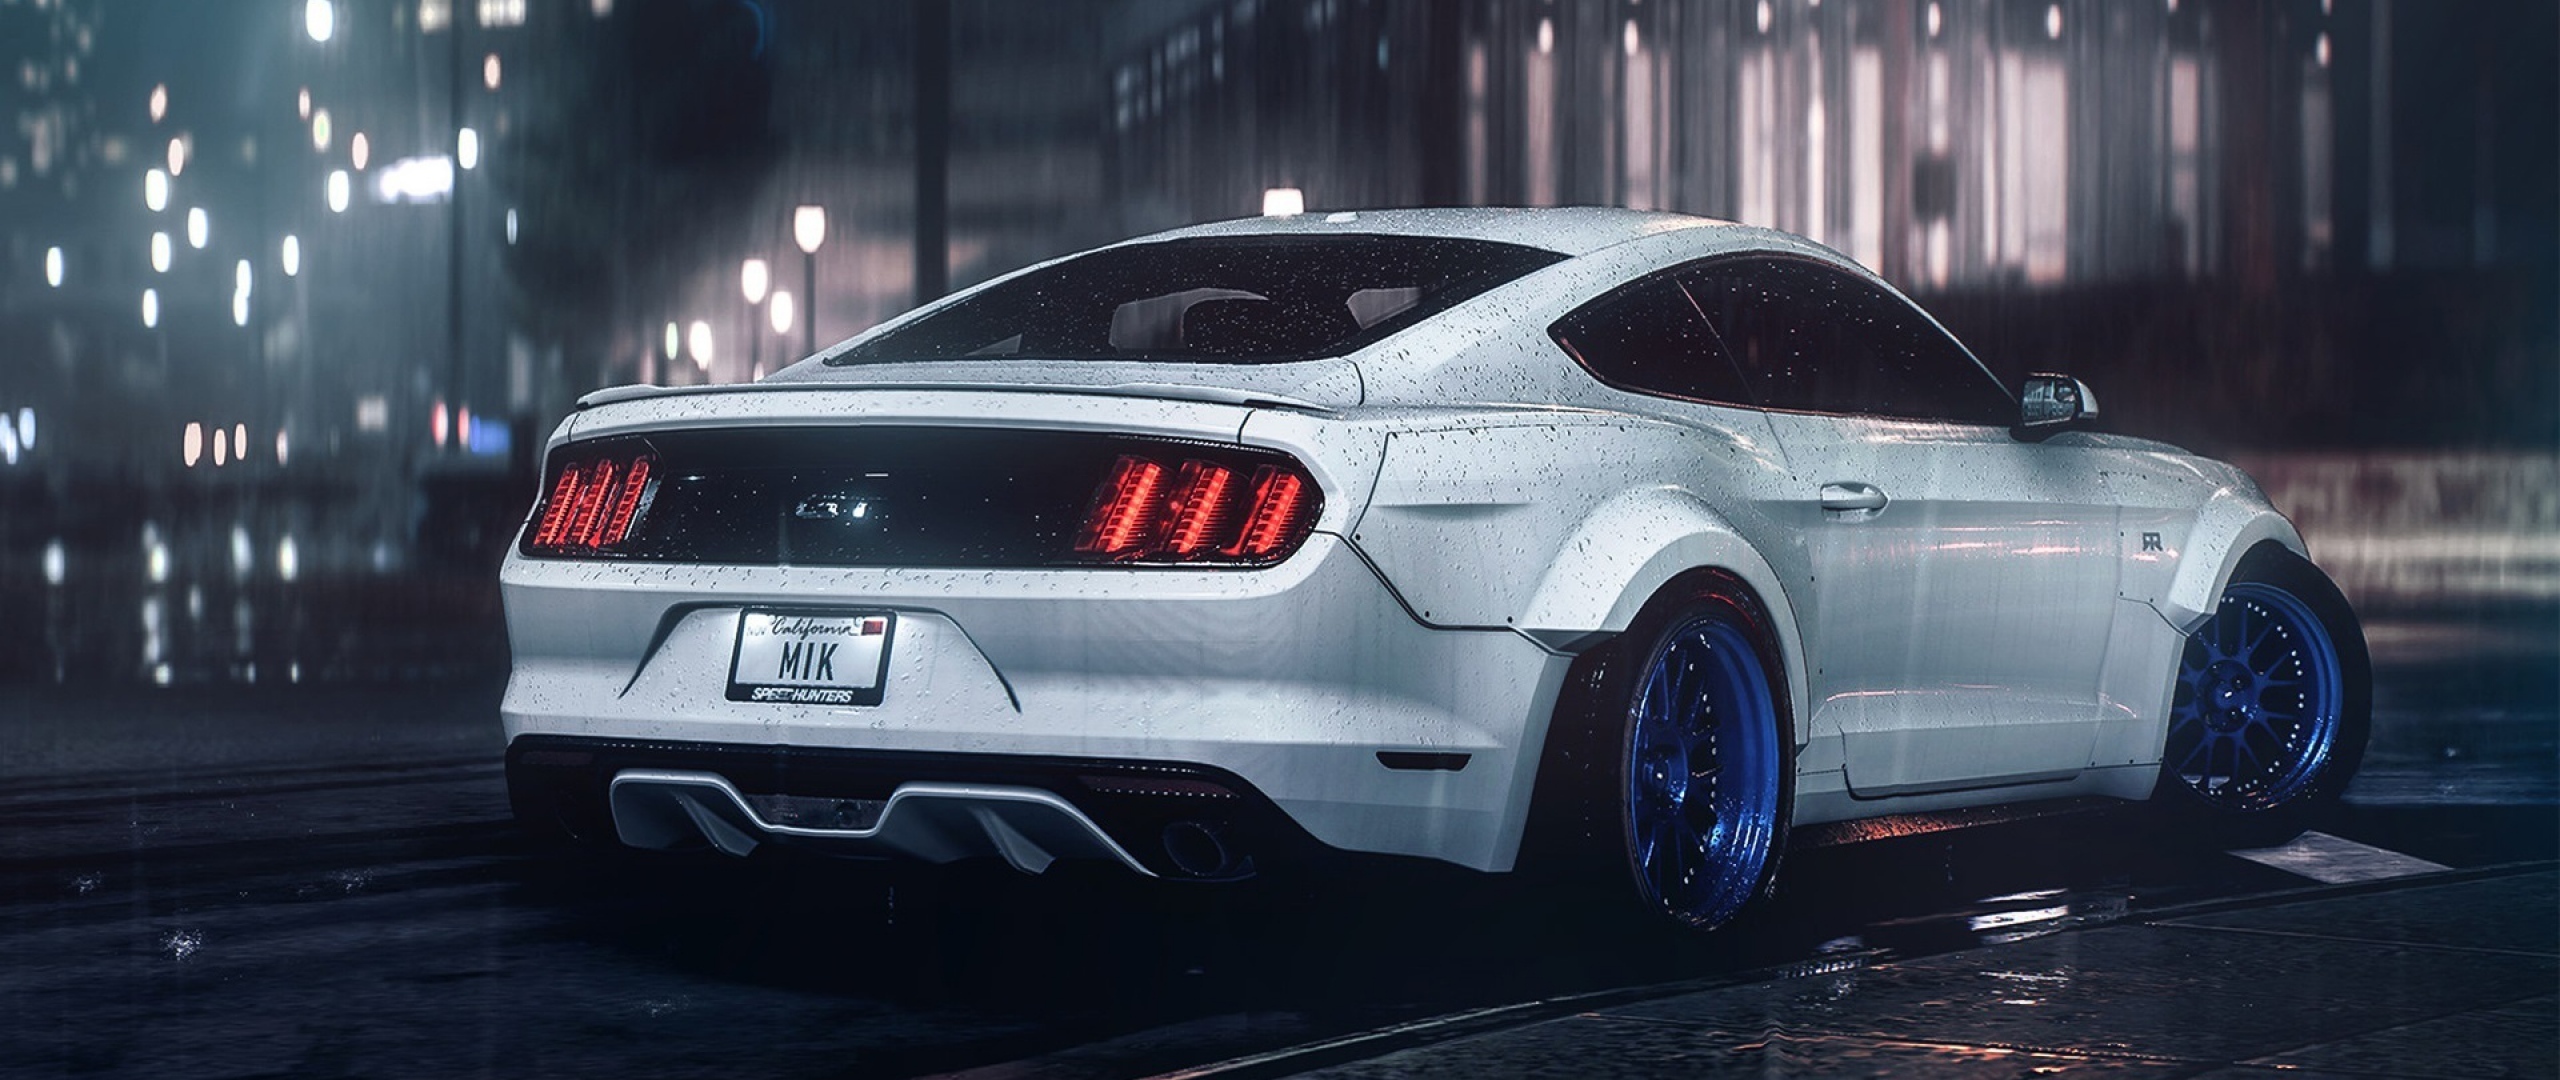 2560x1080 Ford Mustang Gt 2016 2560x1080 Resolution Hd 4k Wallpapers Images Backgrounds Photos And Pictures